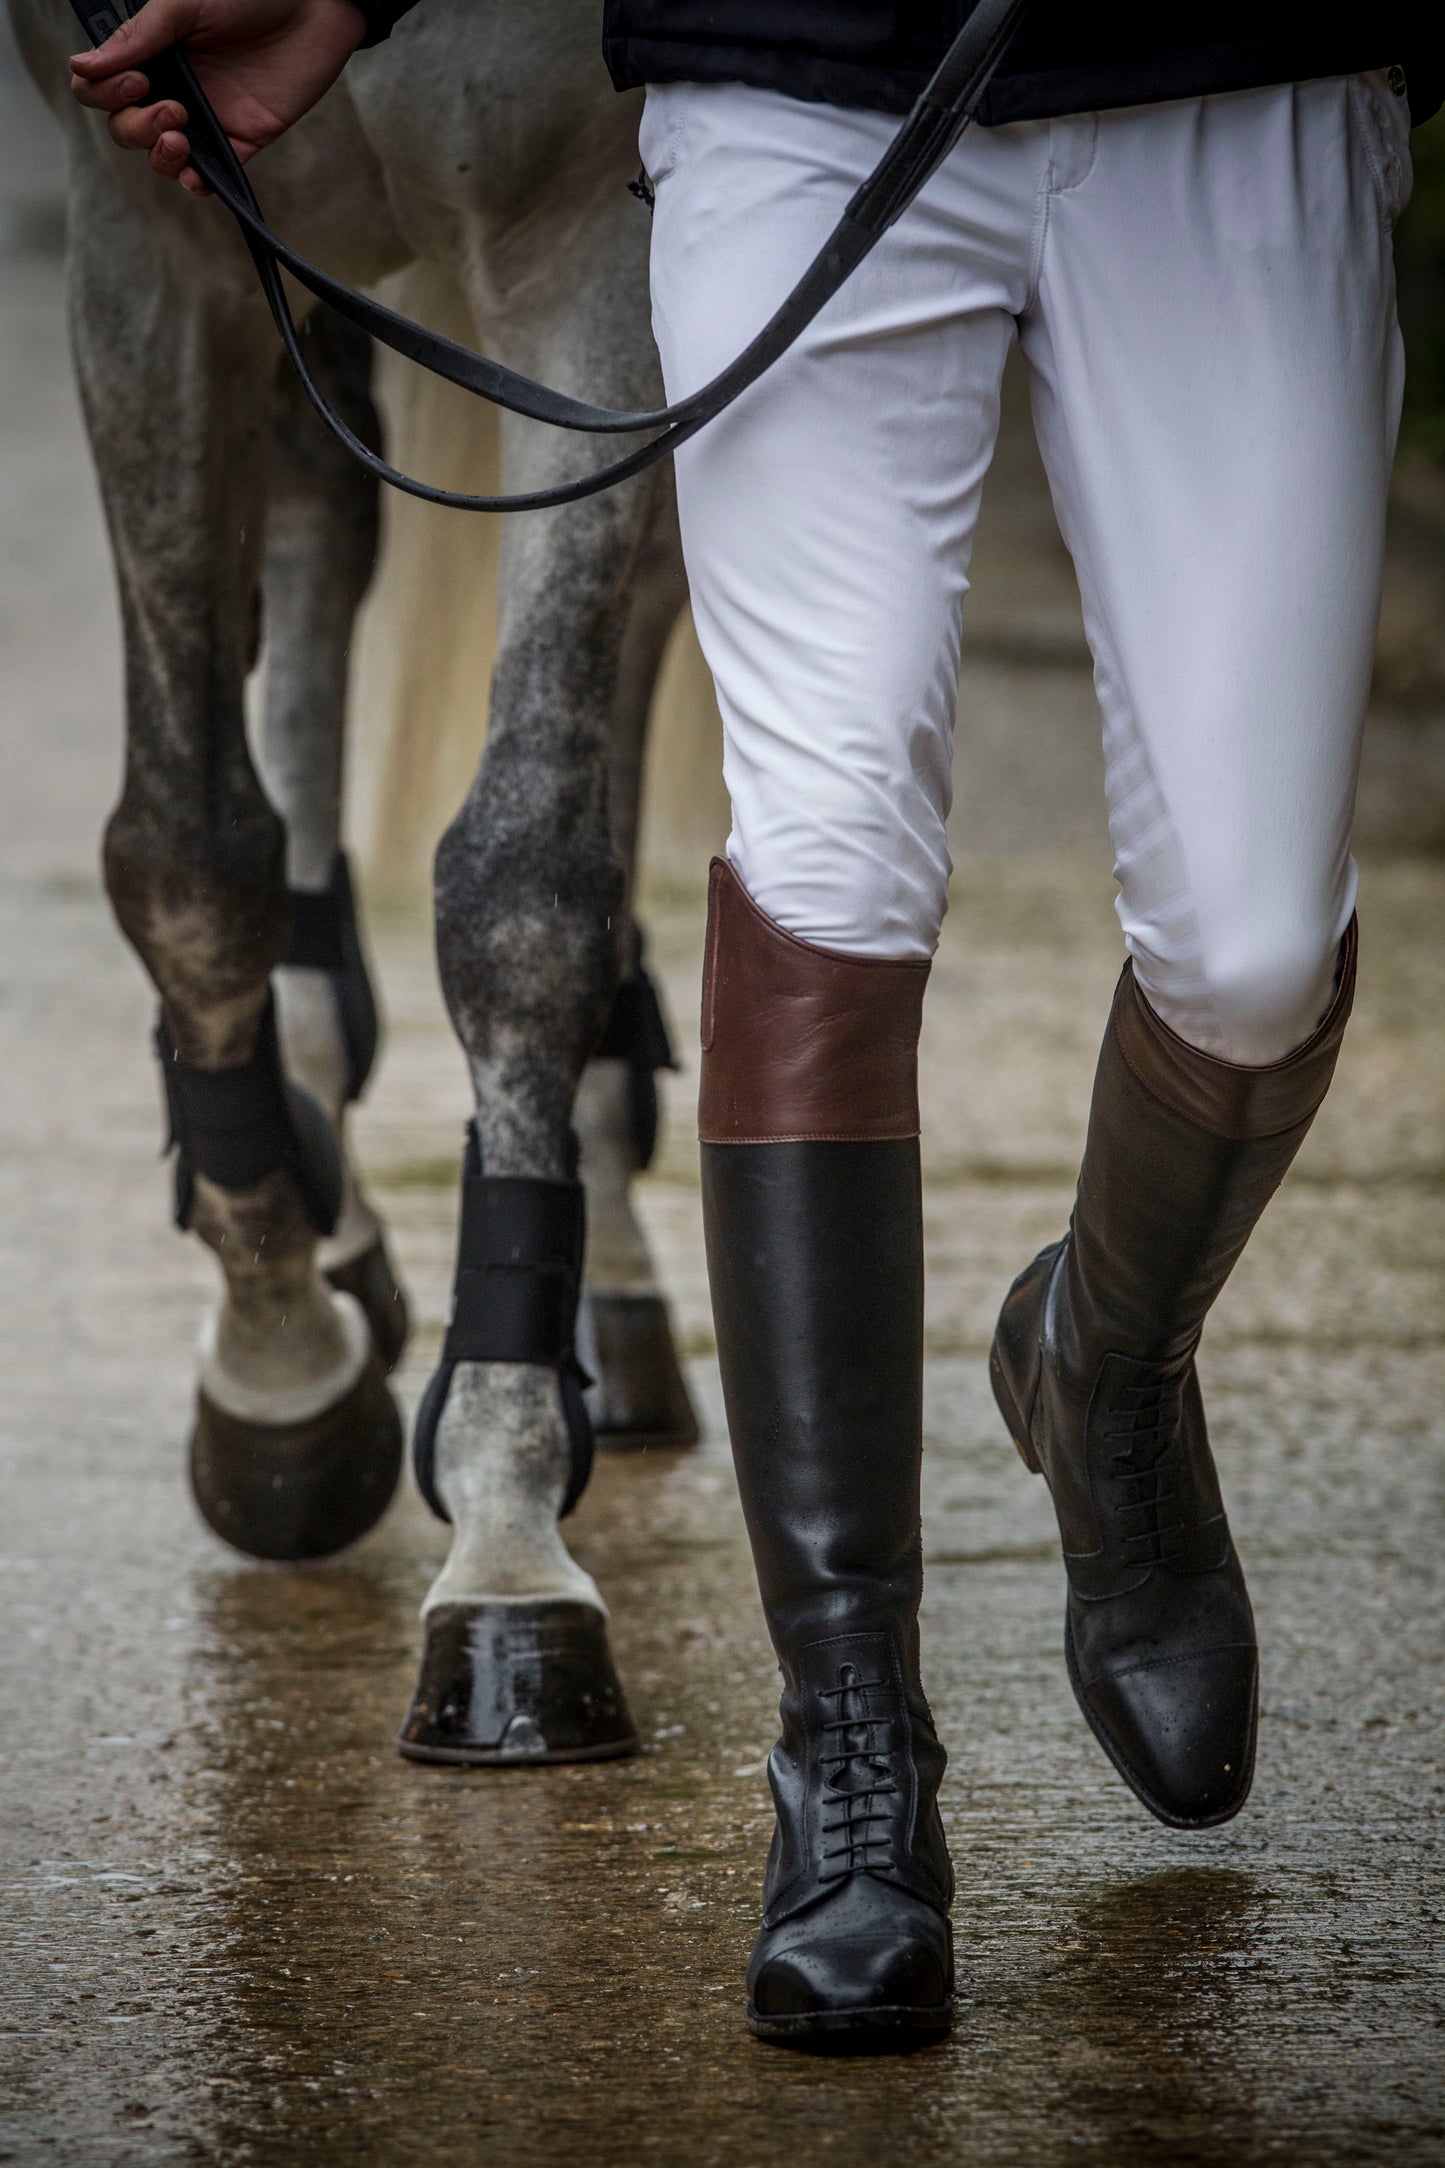 Bespoke Riding Boots, The Stockdale